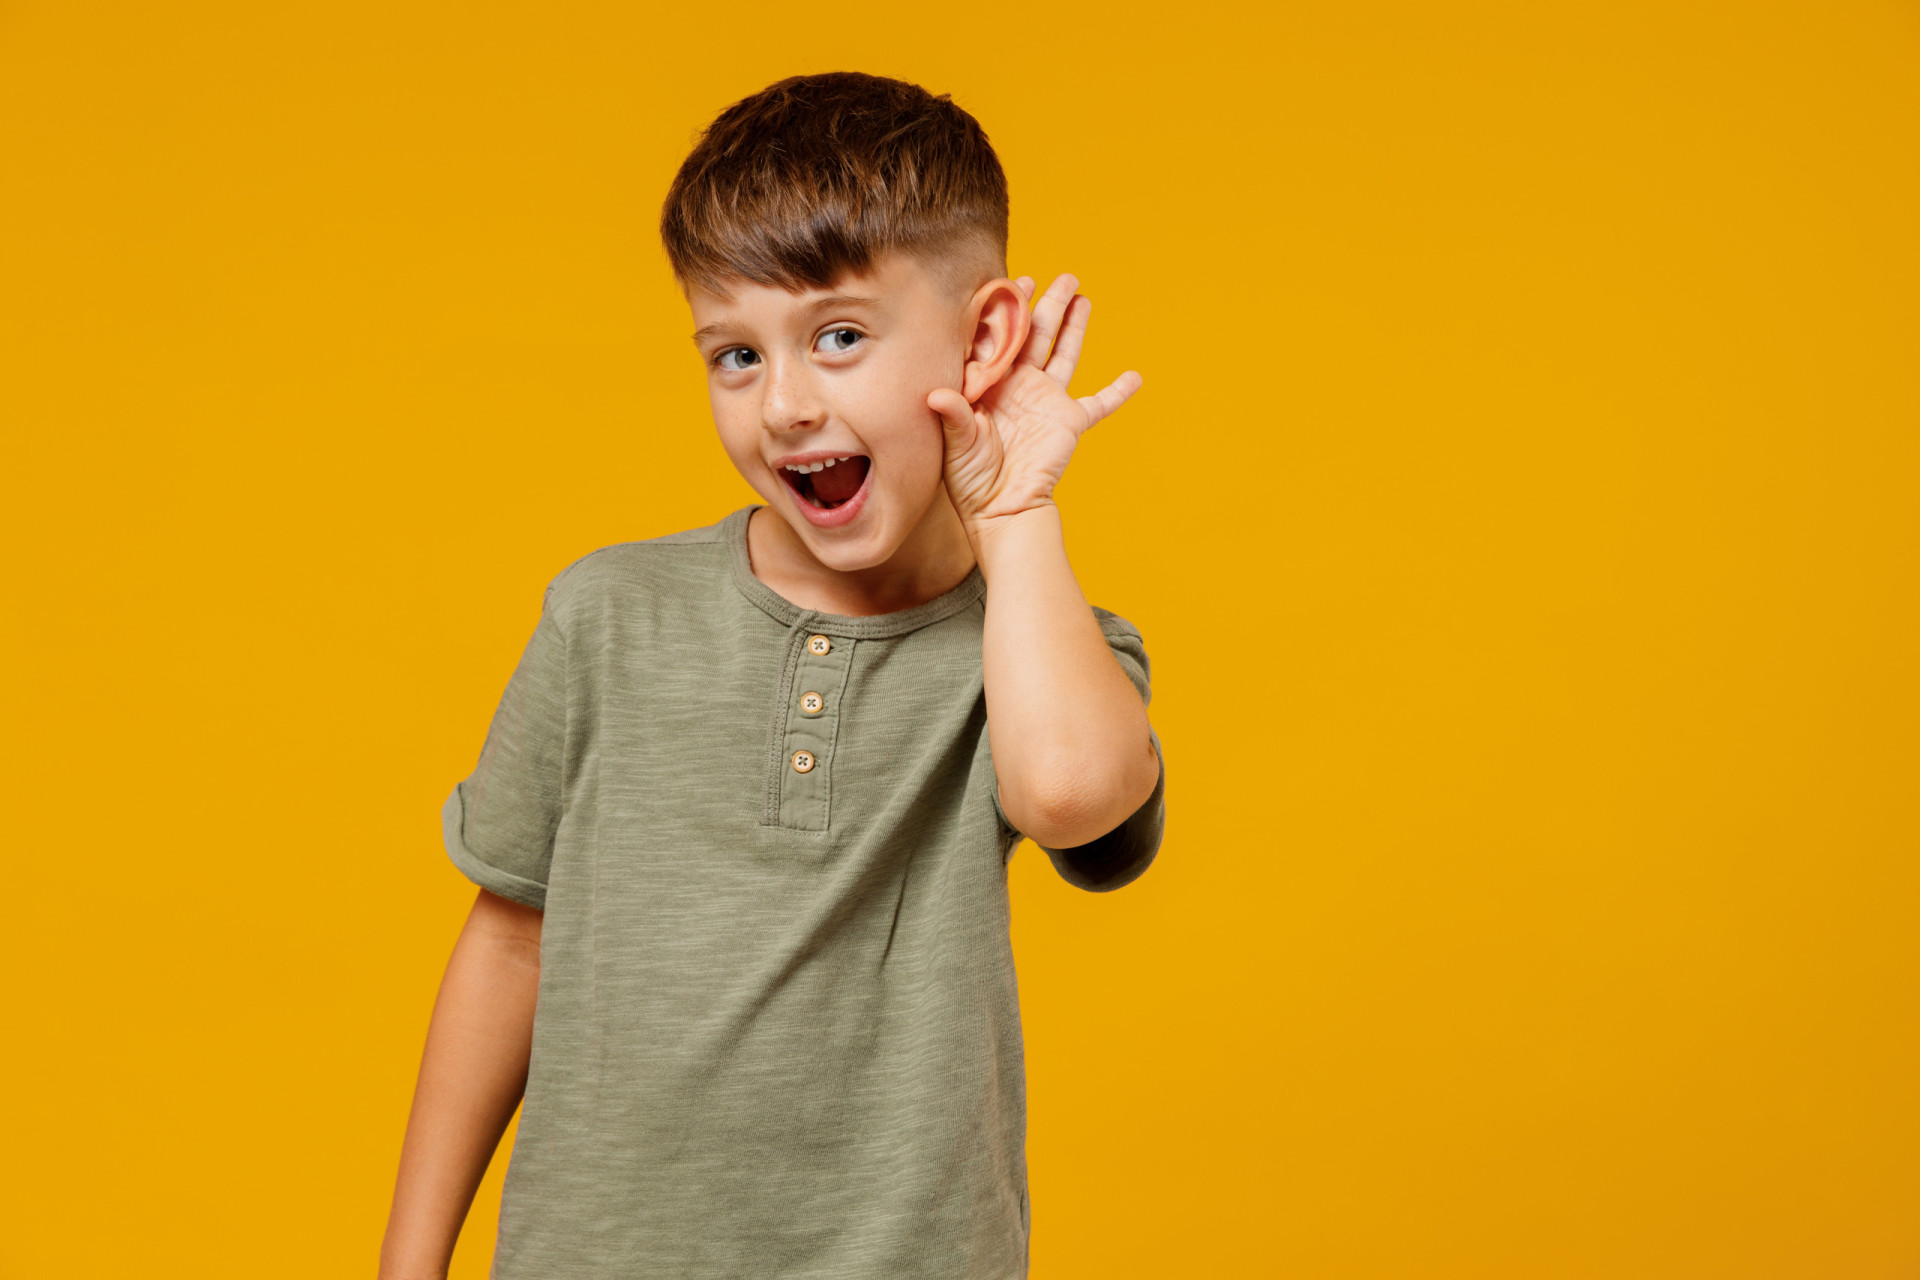 <p>Encouraging kids to actively listen during conversations is a fundamental aspect of good manners. It shows respect for others' thoughts and feelings.</p><p>You may also like:<a href="https://www.starsinsider.com/n/277501?utm_source=msn.com&utm_medium=display&utm_campaign=referral_description&utm_content=588009en-en"> Countries that still have the death penalty</a></p>